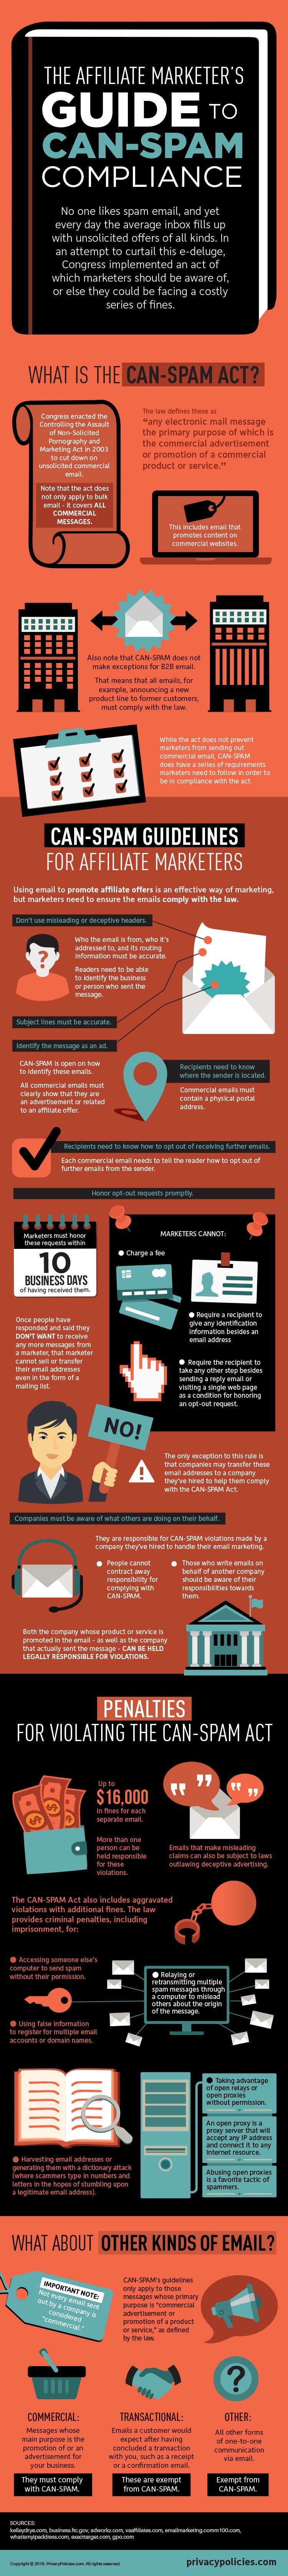 The Affiliate Marketer's Guide to CAN-SPAM Compliance - An Infographic from PrivacyPolicies.com Blog